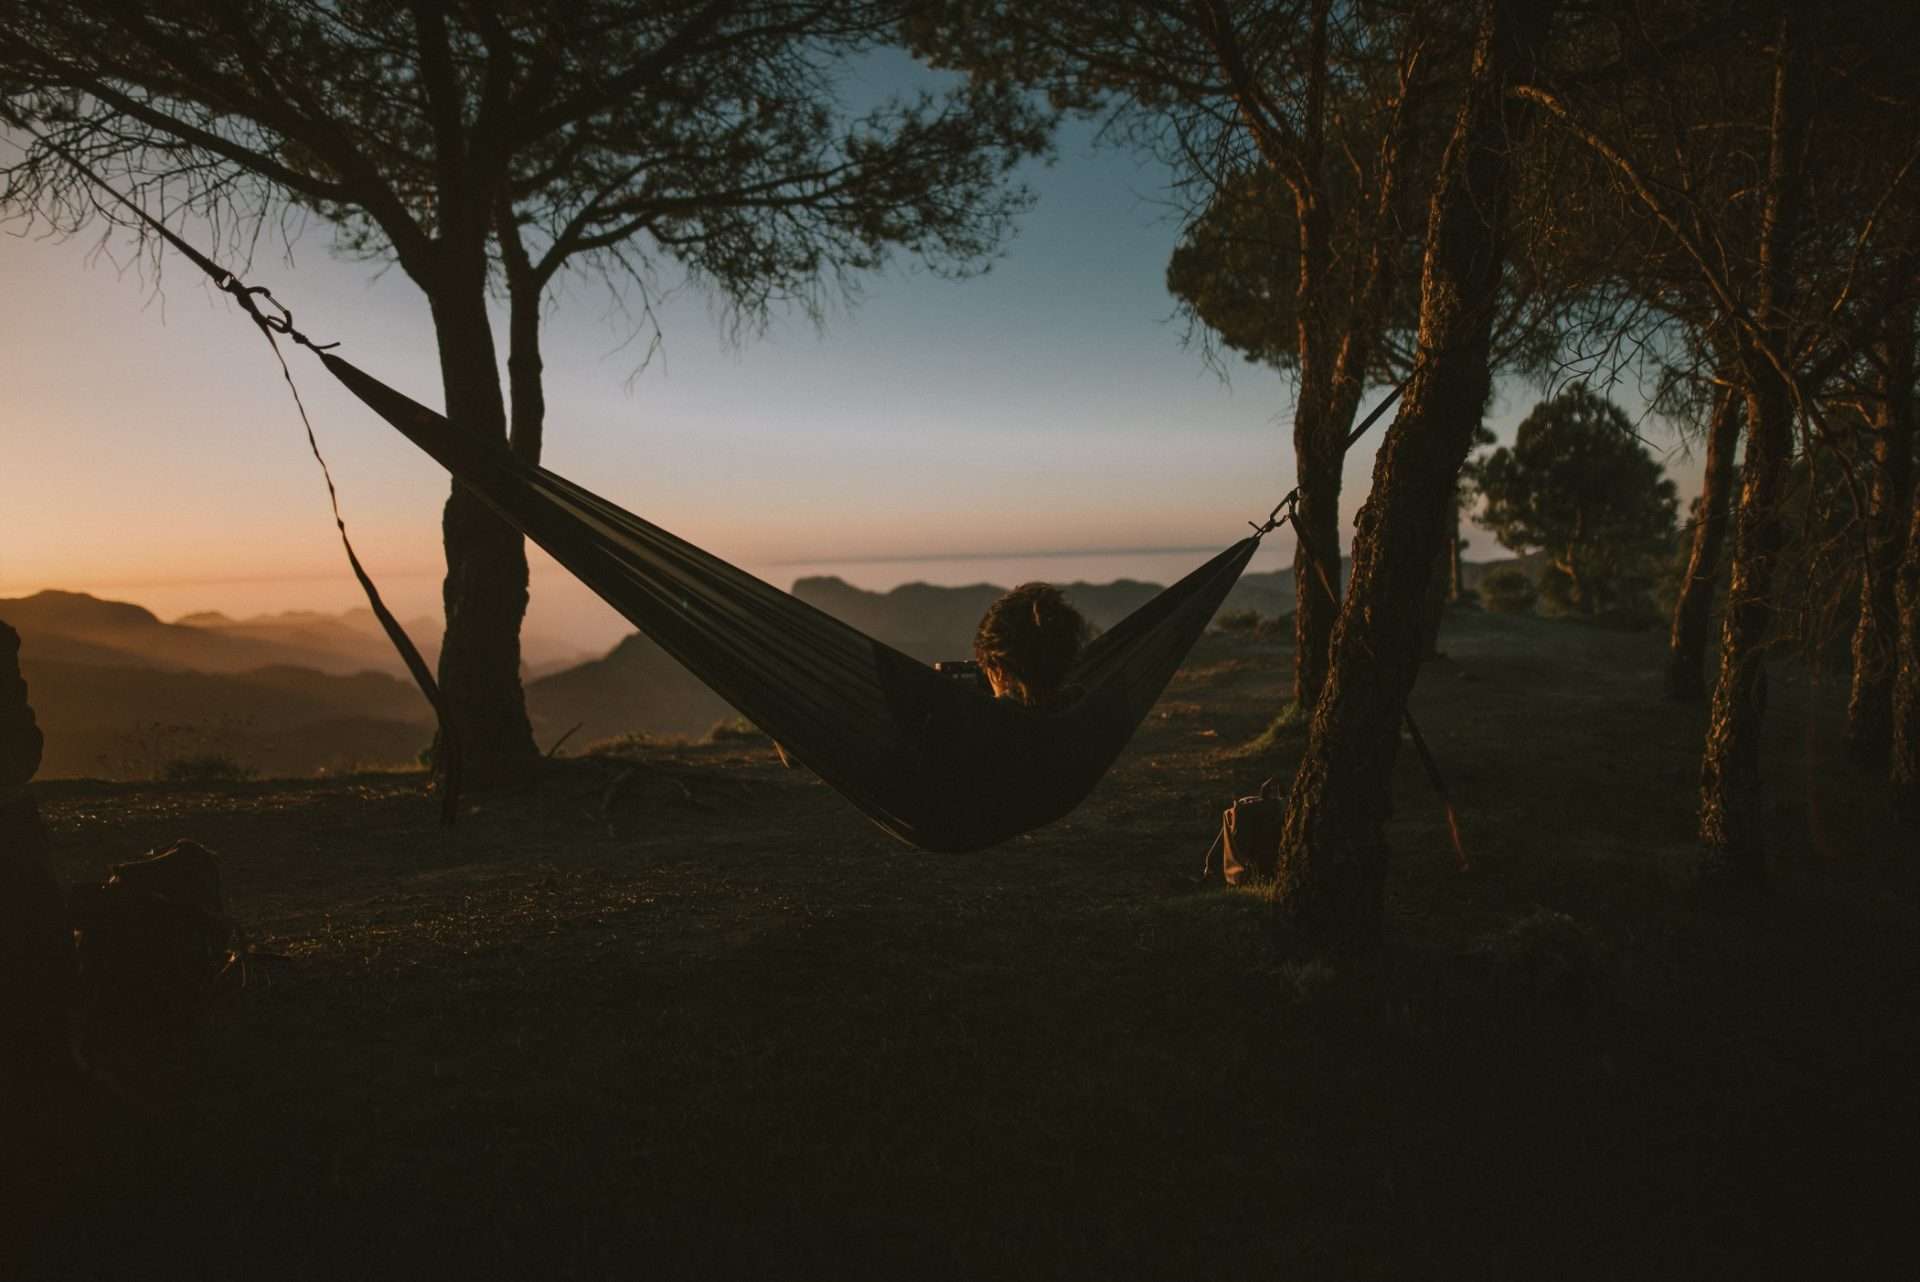 Person sleeping in a hammock while the sun sets